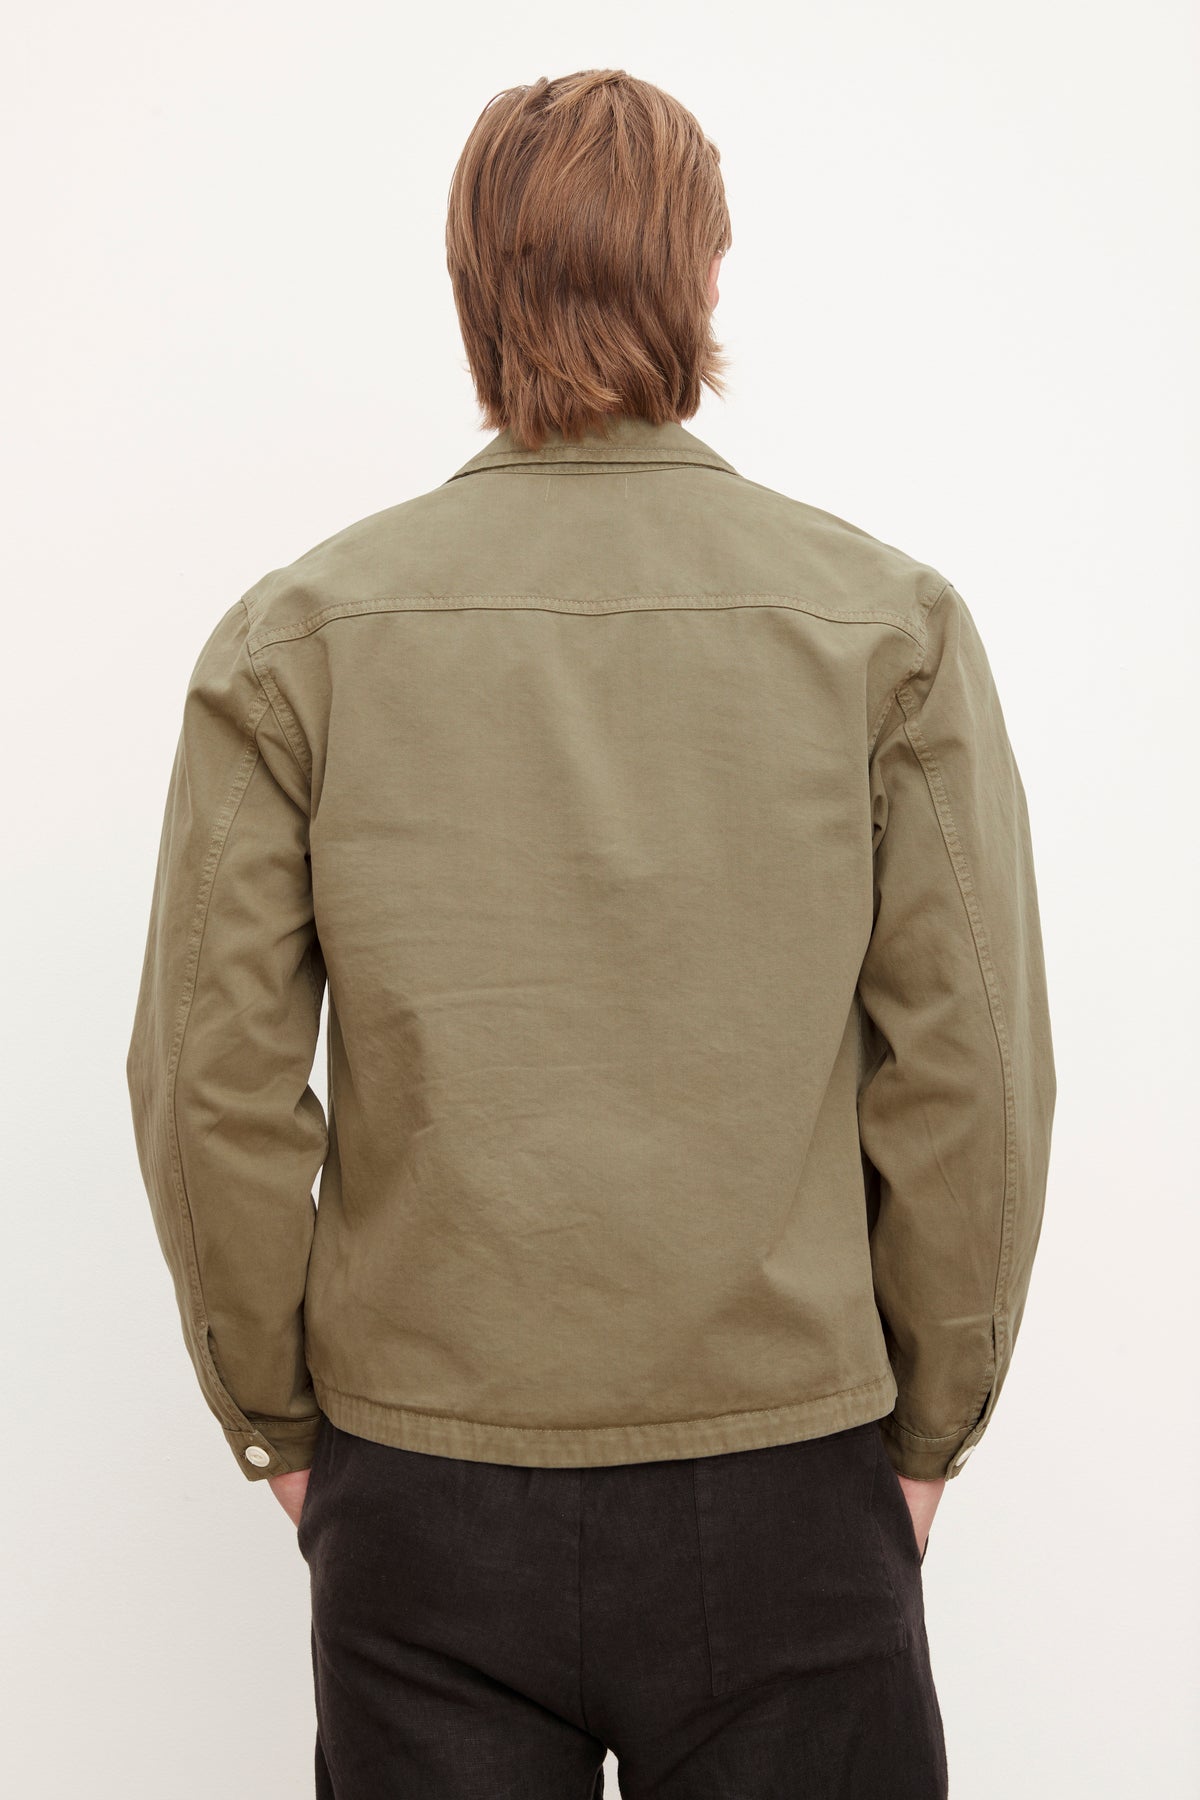 The back view of a man wearing a FLANNERY SANDED TWILL BUTTON-UP JACKET from Velvet by Graham & Spencer.-36009002926273